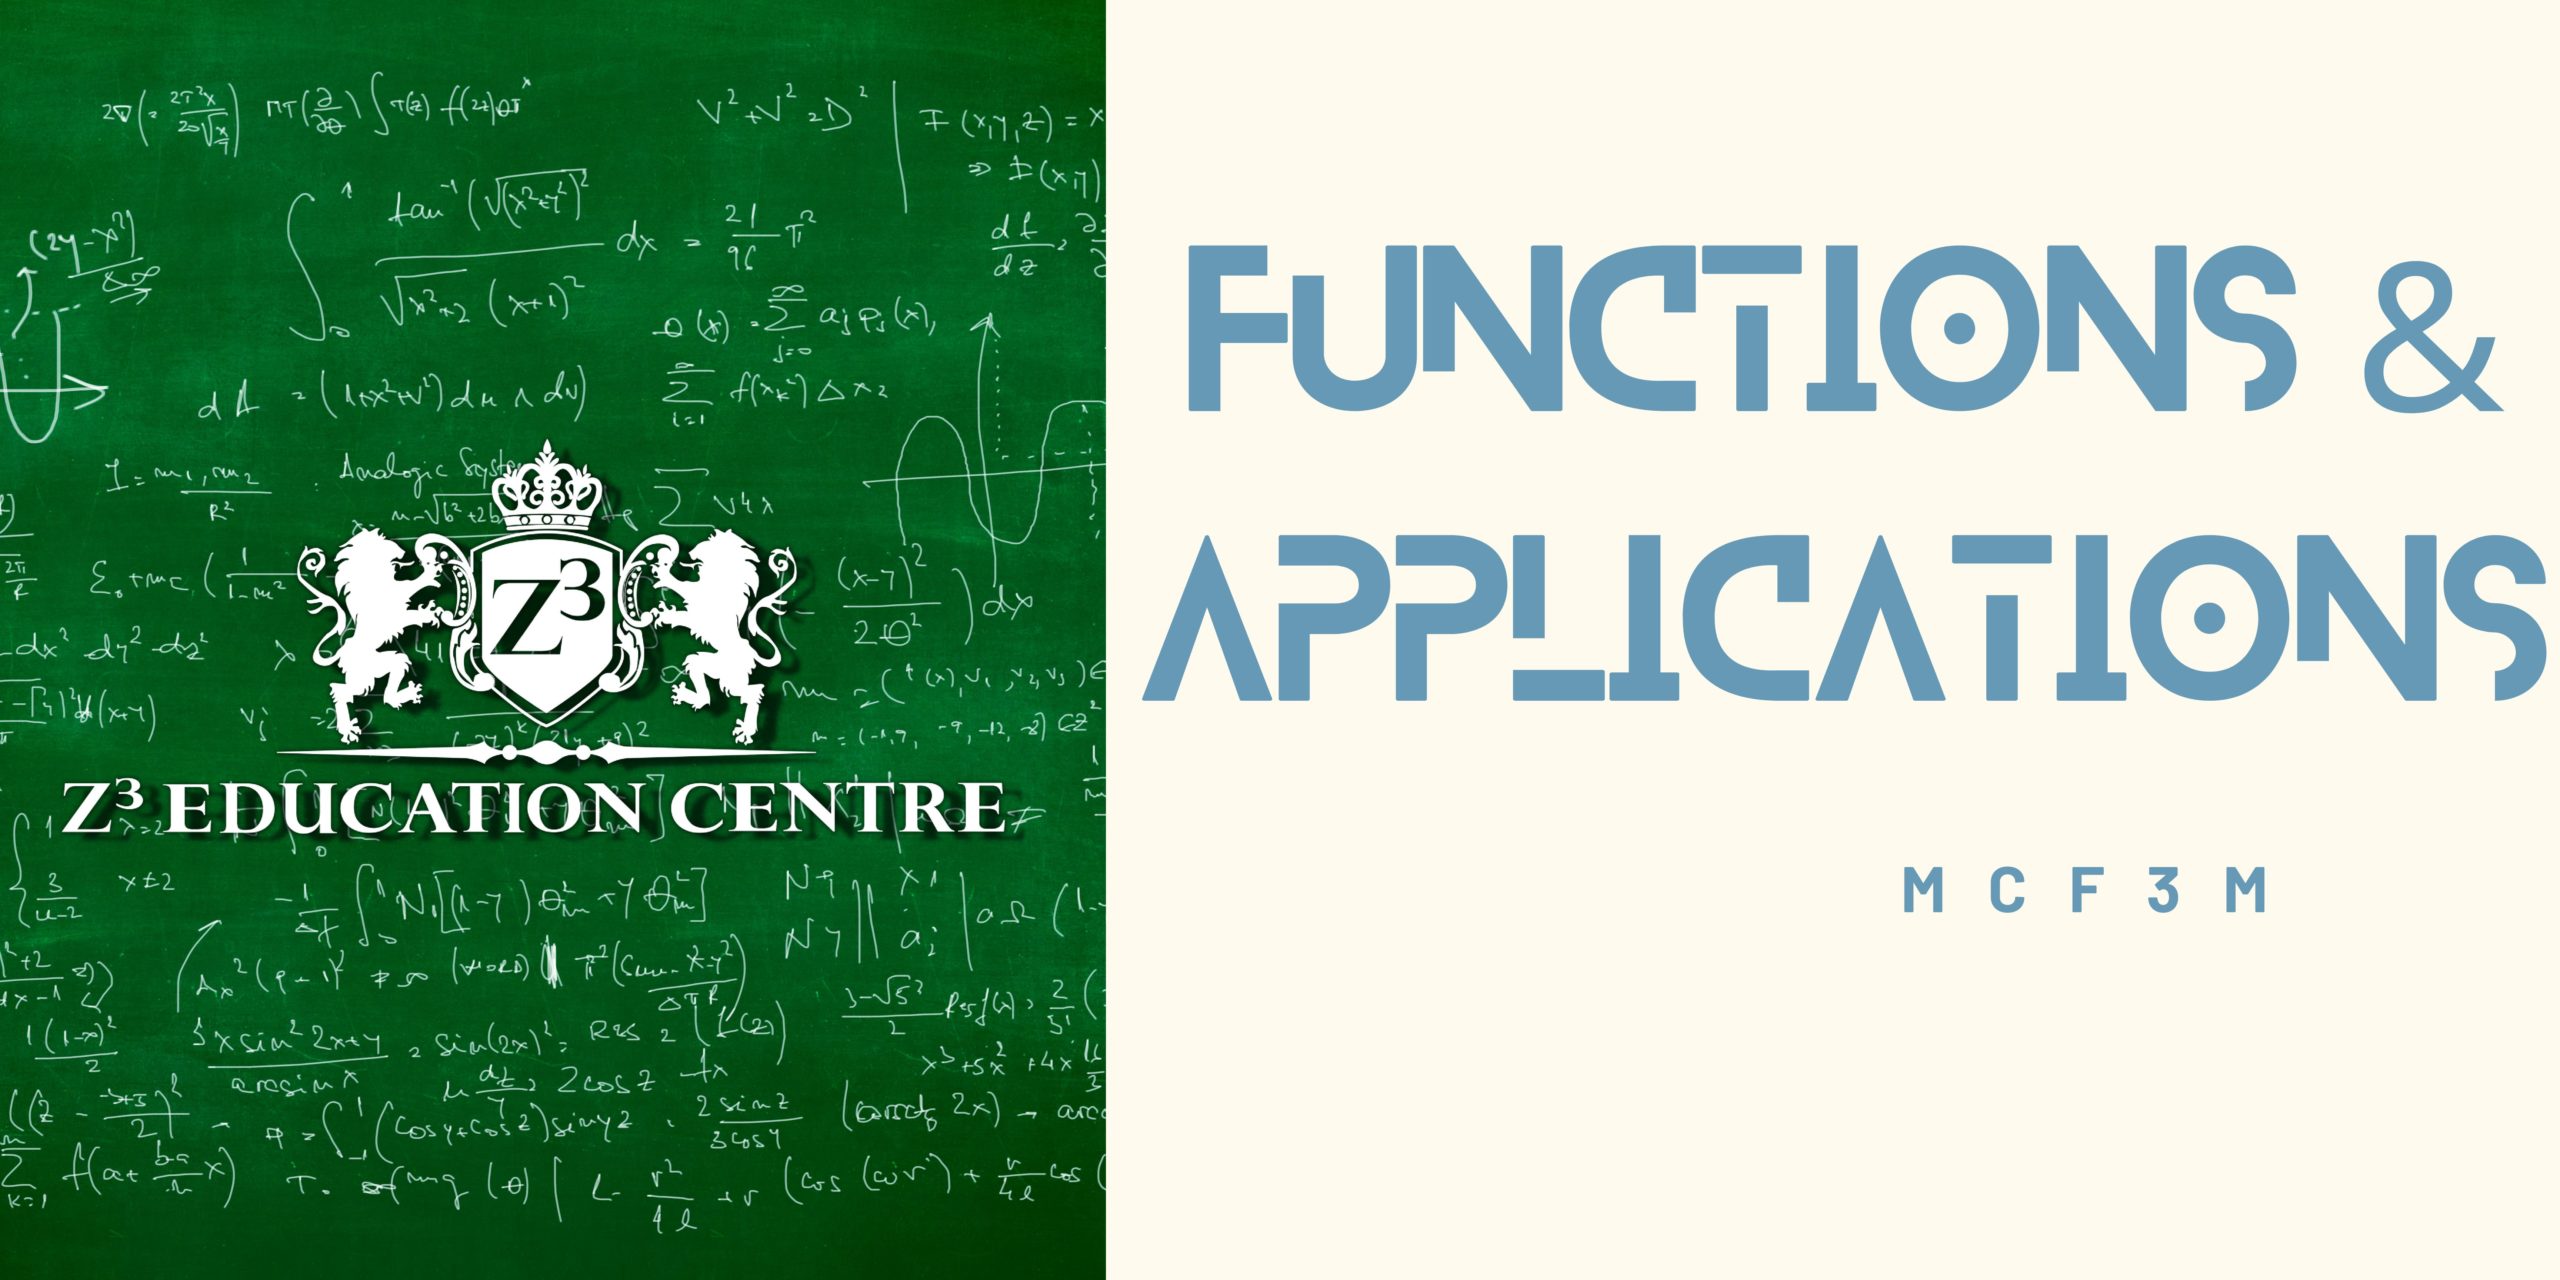 Functions and Applications Image